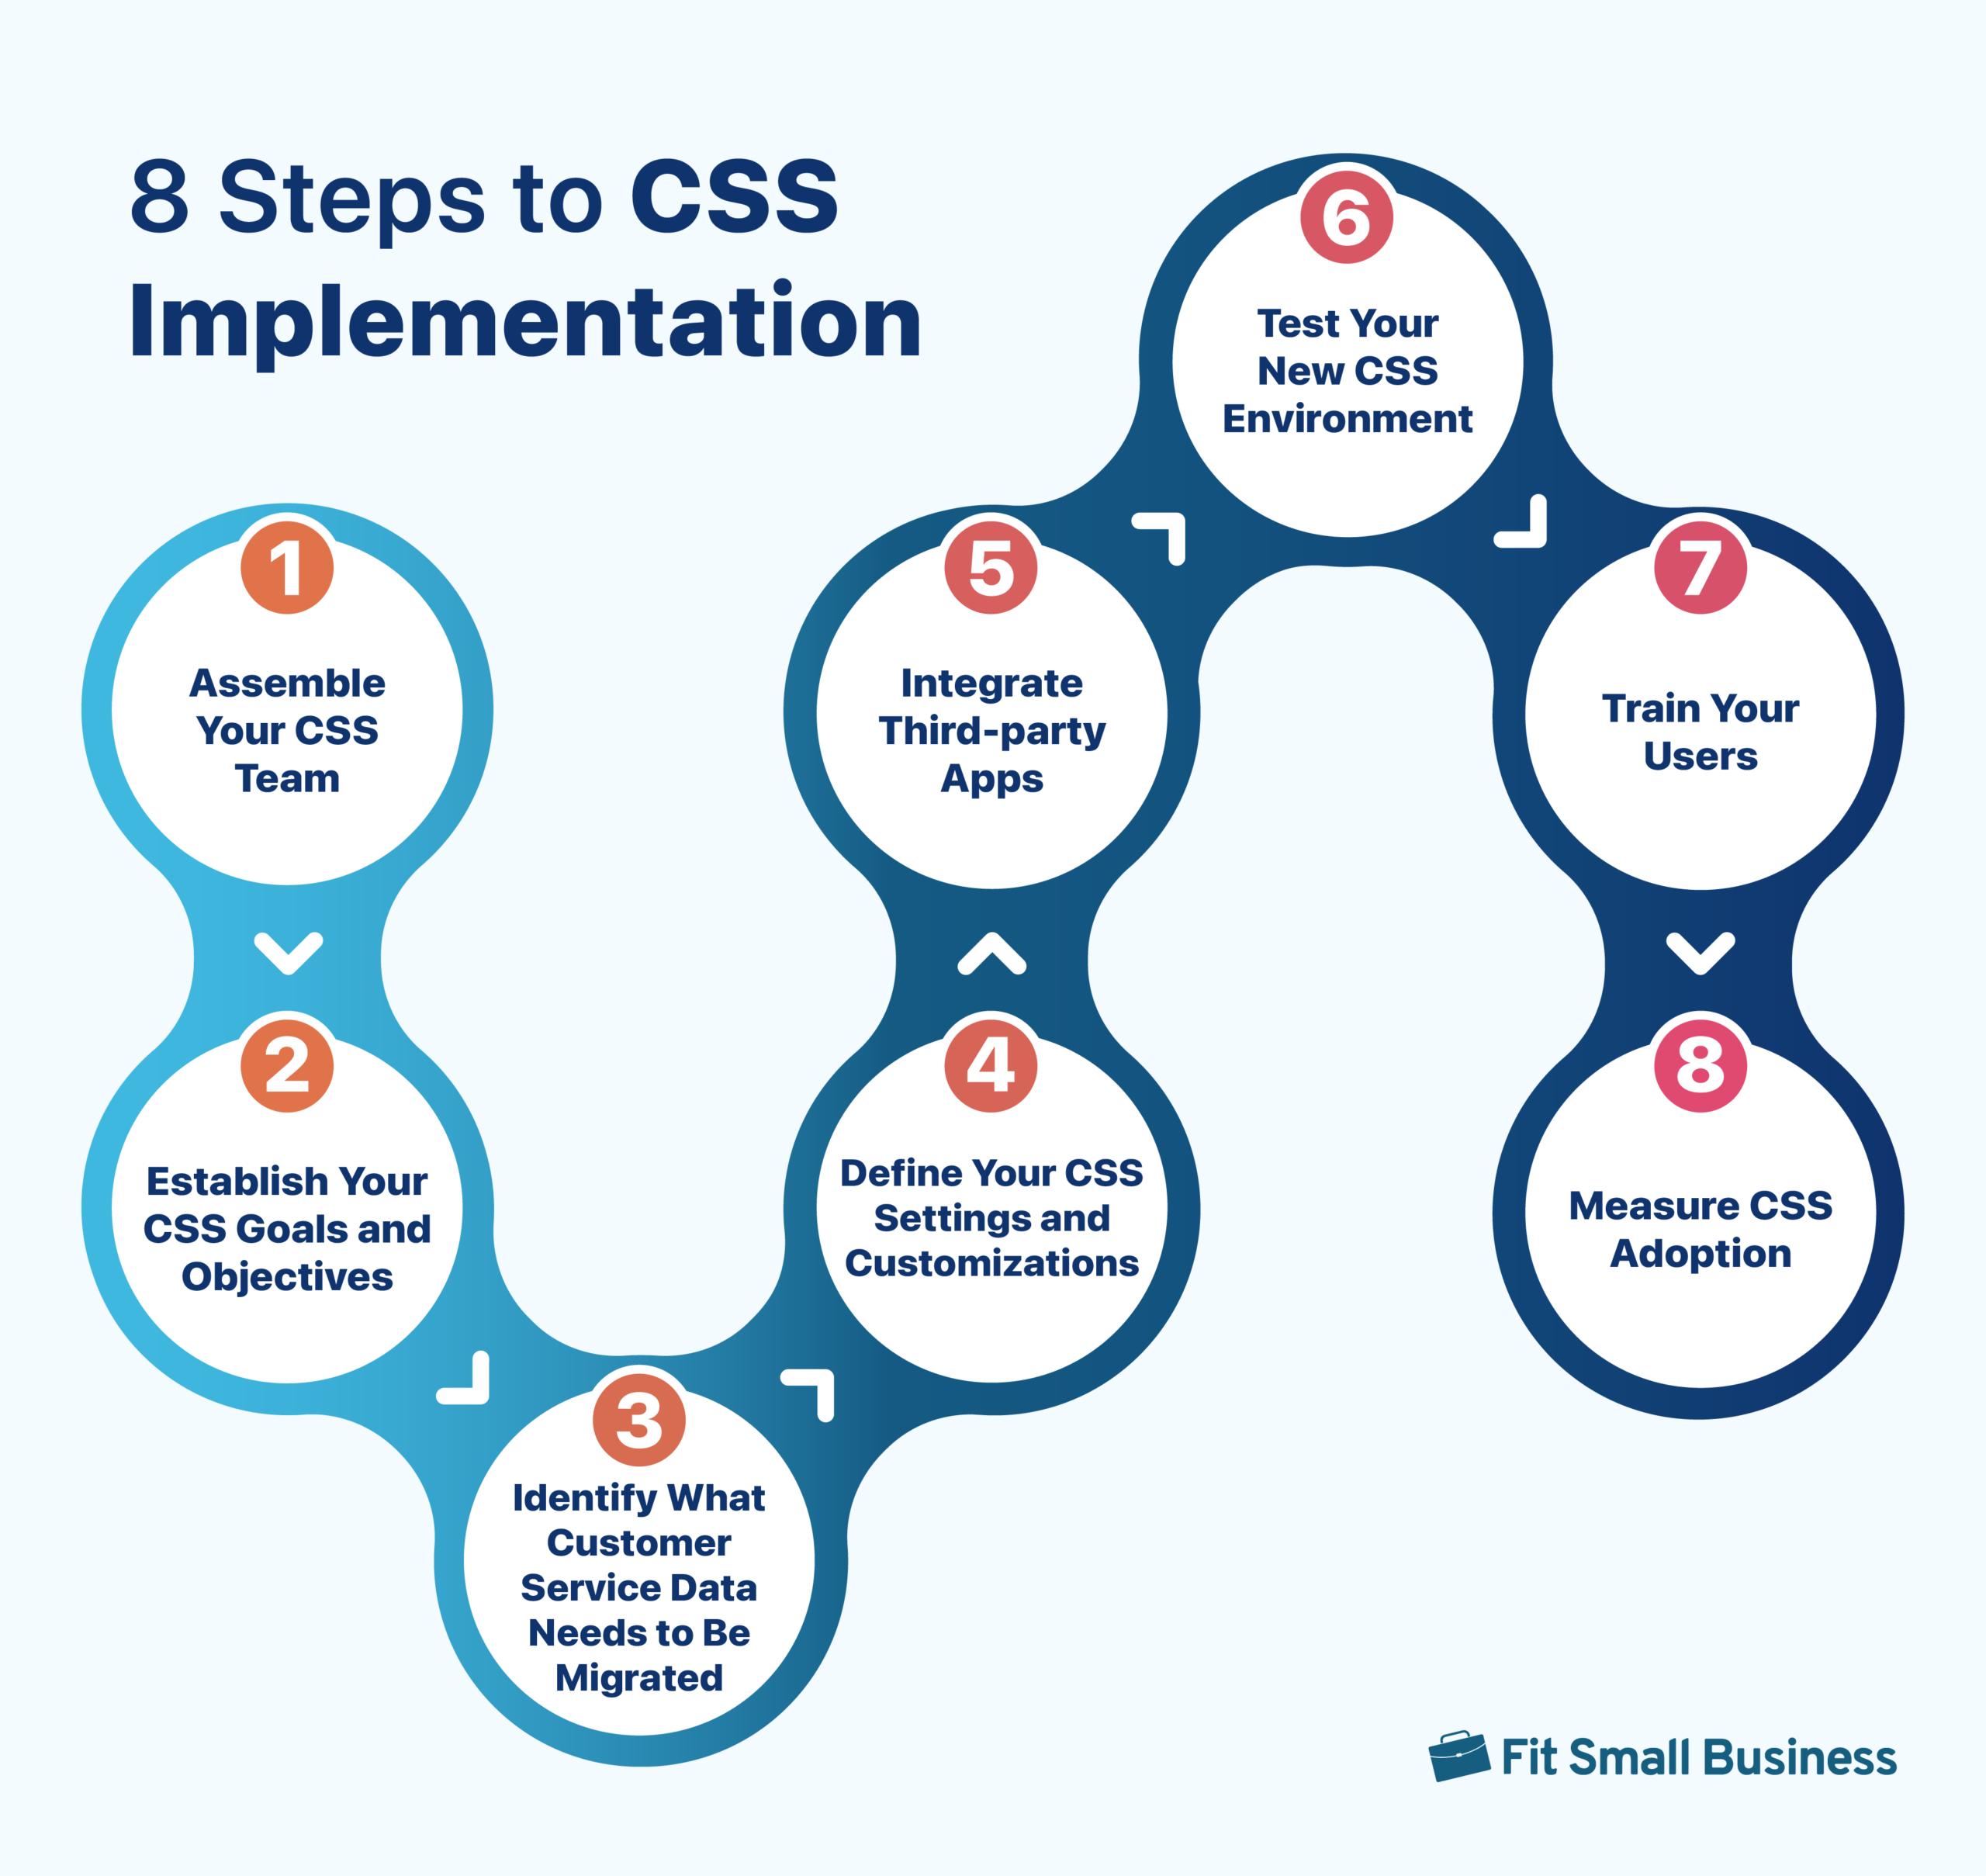 A graphic on how to implement CSS 